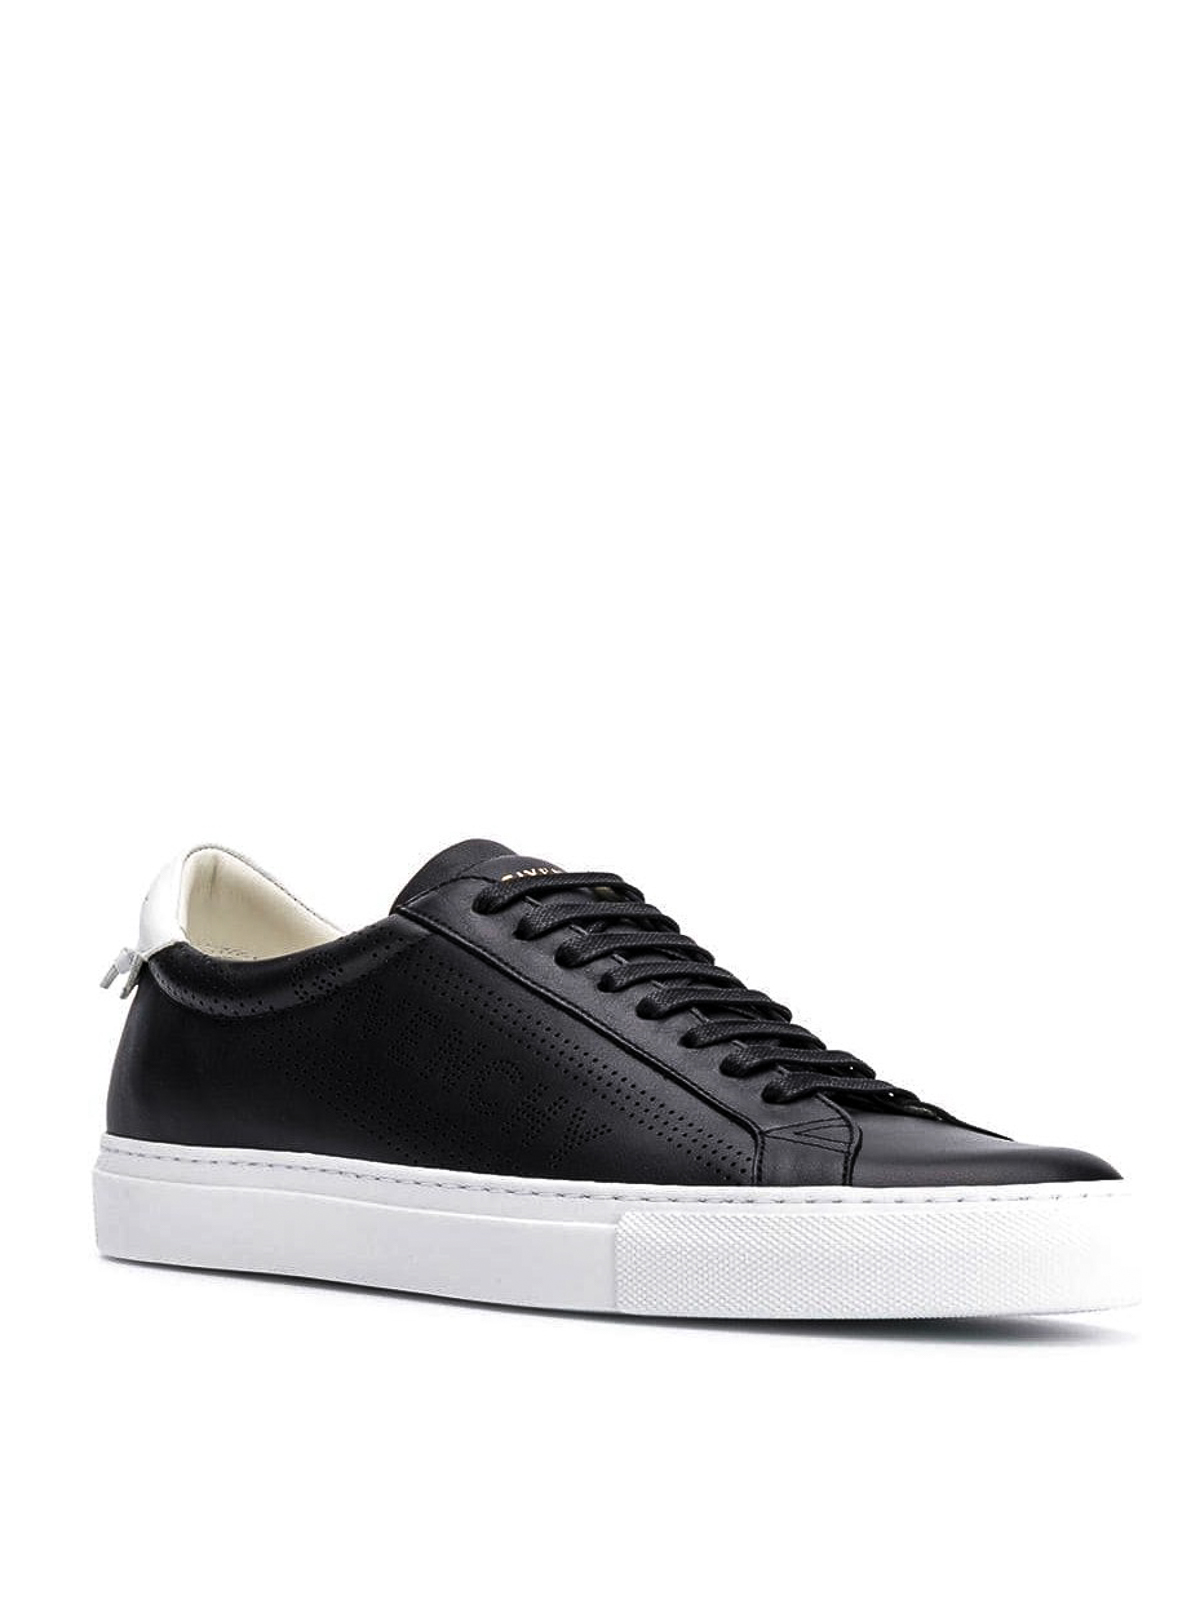 givenchy all black sneakers